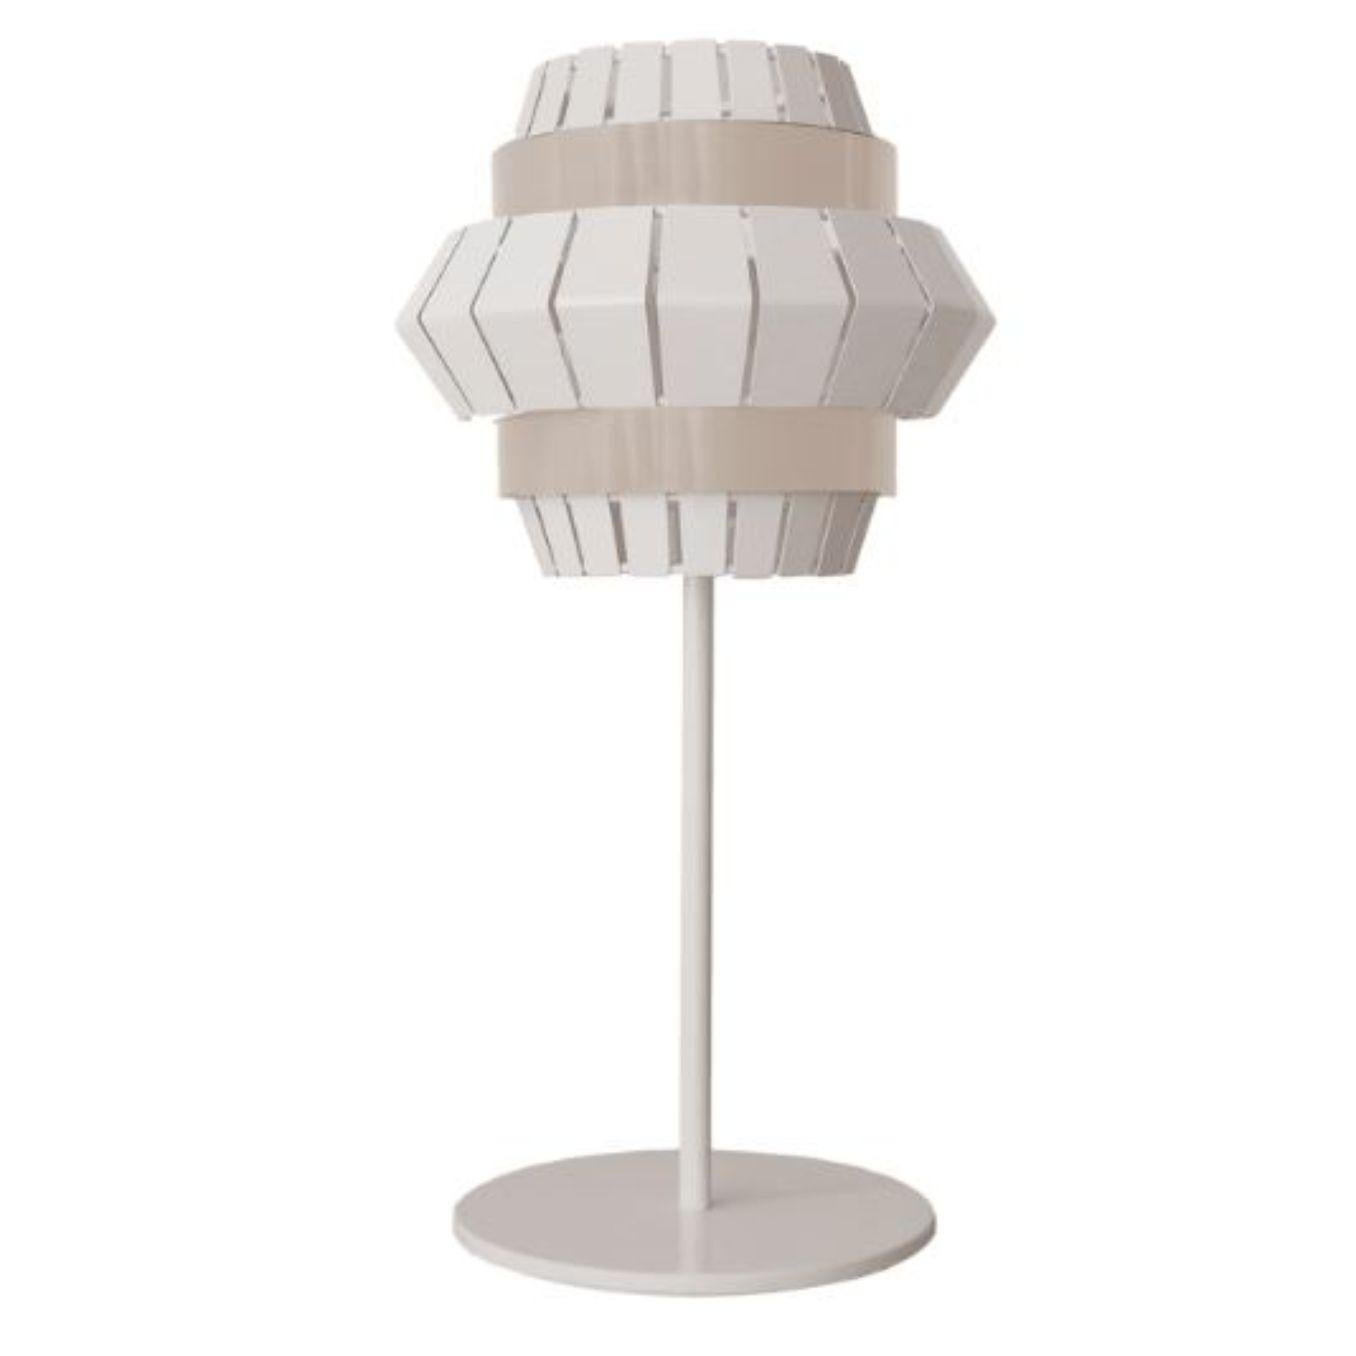 Ivory and taupe comb table lamp by Dooq
Dimensions: W 25.5 x D 25.5 x H 60 cm
Materials: lacquered metal.
Also available in different colors and materials.

Information:
230V/50Hz
E14/1x20W LED
120V/60Hz
E12/1x15W LED
bulb not included



Dooq is a